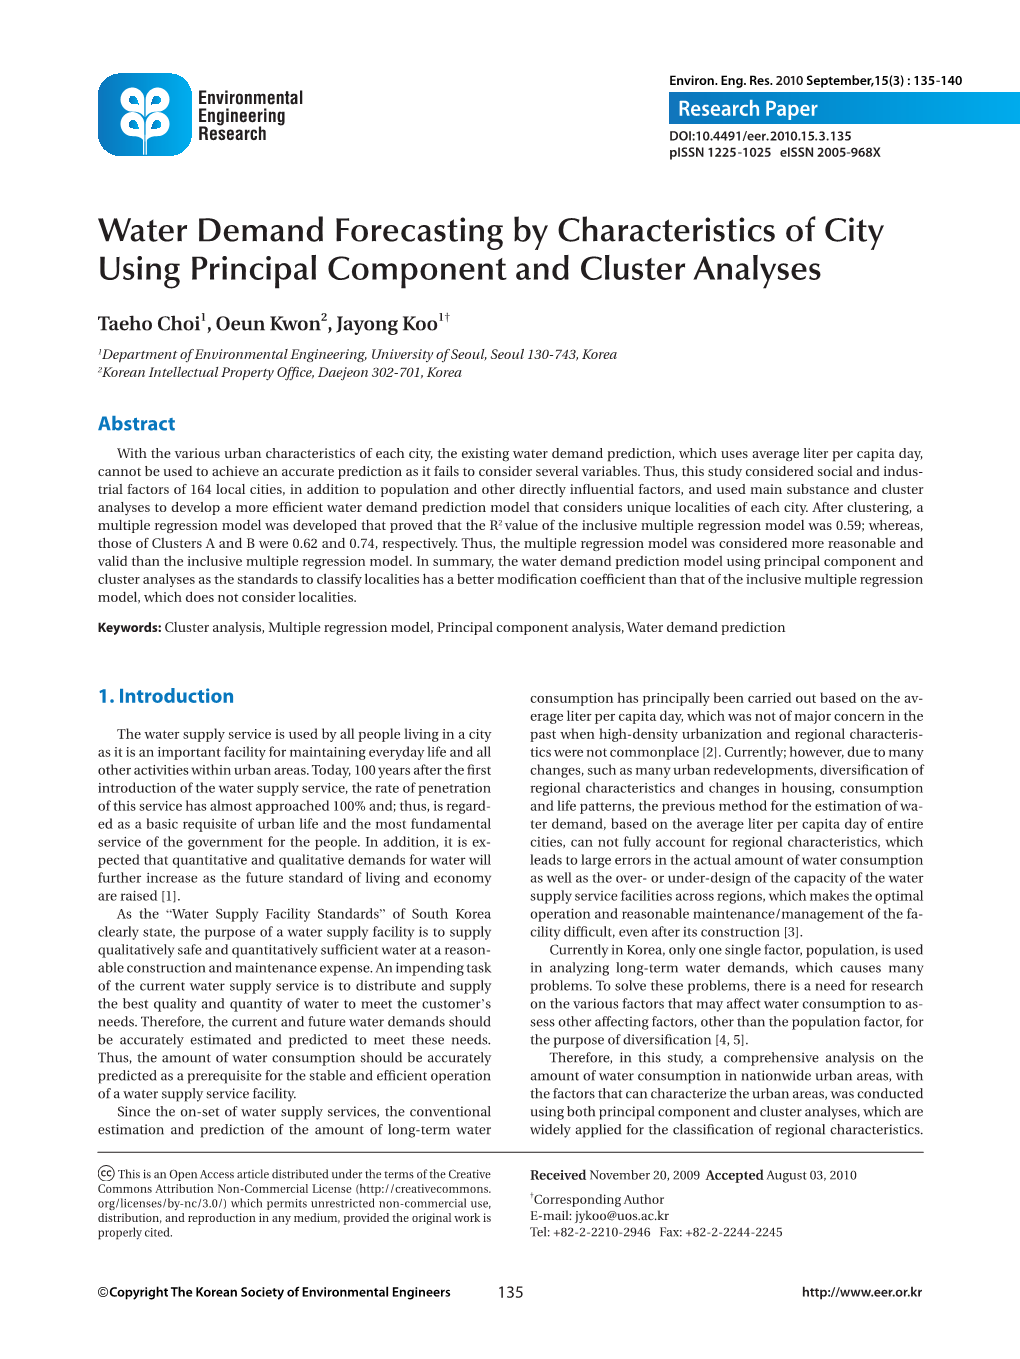 Water Demand Forecasting by Characteristics of City Using Principal Component and Cluster Analyses